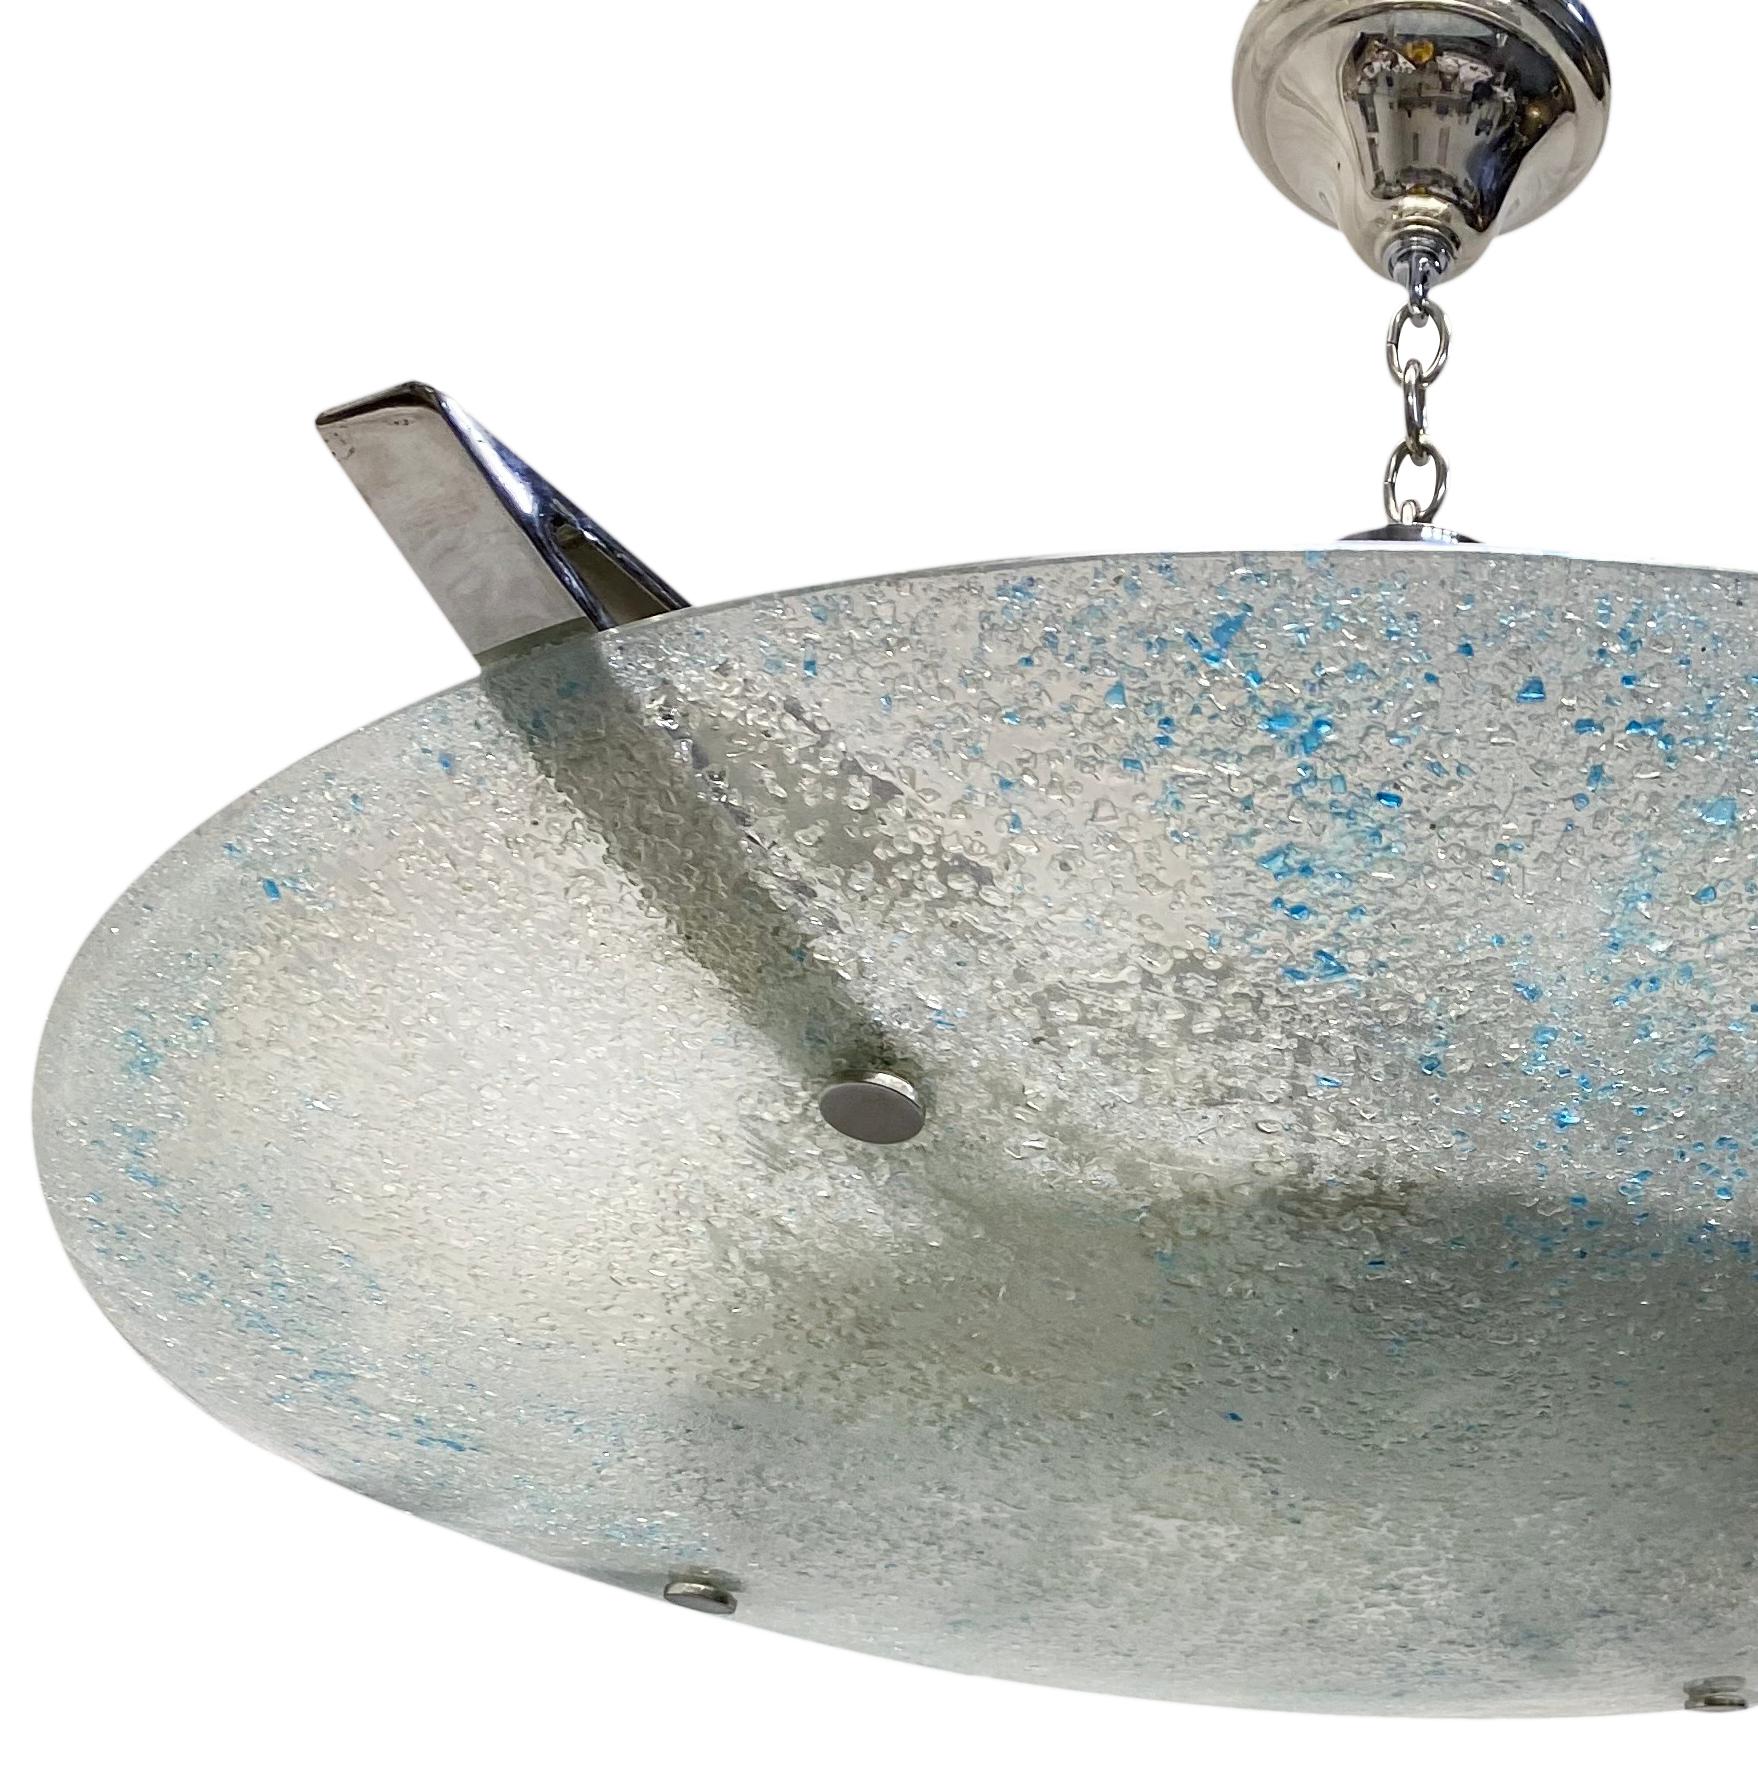 A large circa 1960's Italian molded glass clear and blue light fixture with 12 interior lights and nickel plated body.

Measurements:
Diameter: 40